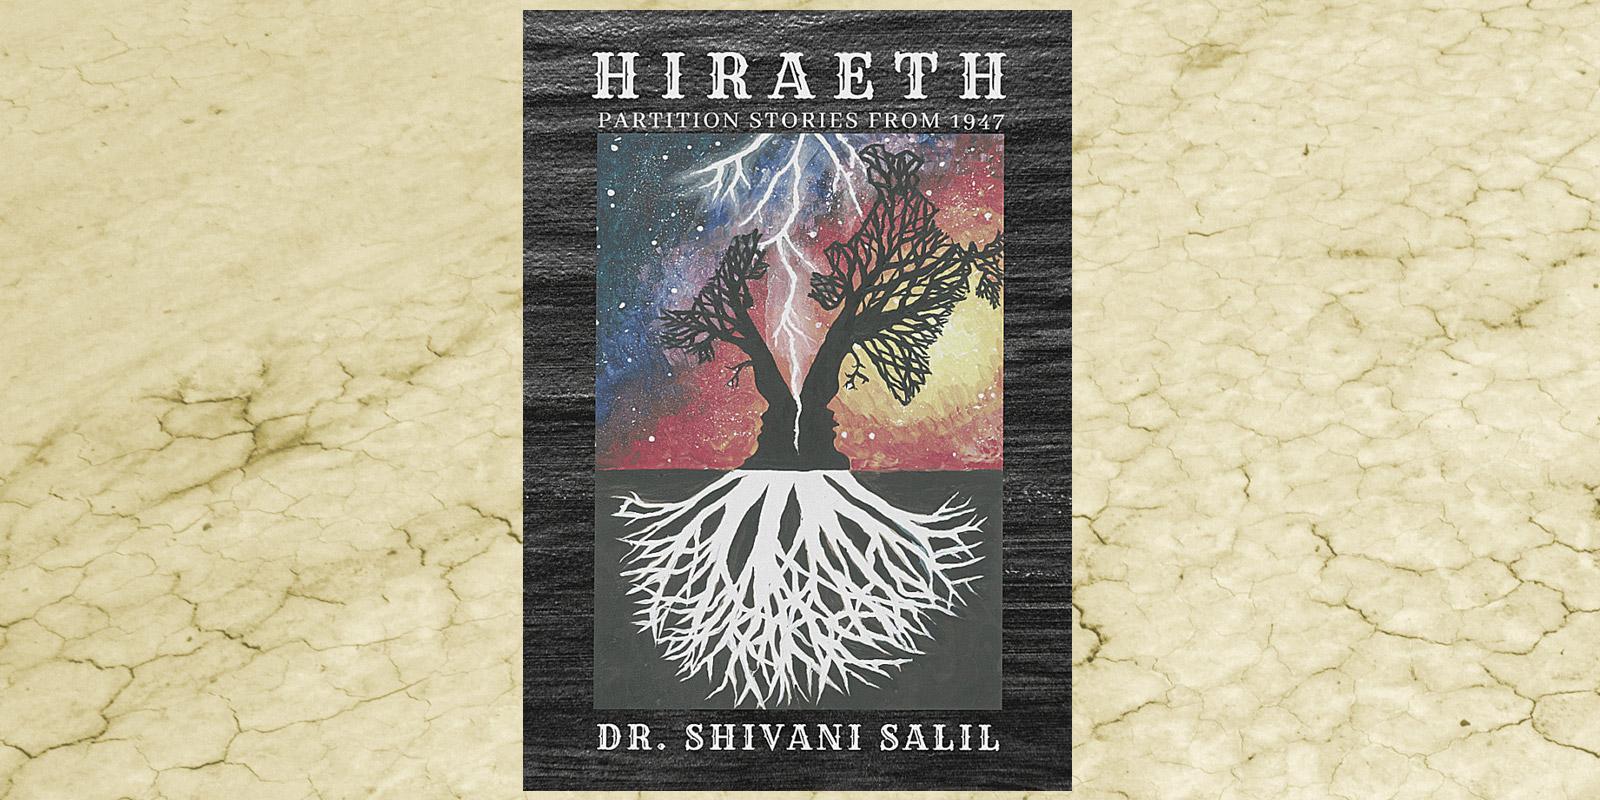 Hiraeth: Partition Stories From 29 by Dr. Shivani Salil Book Review